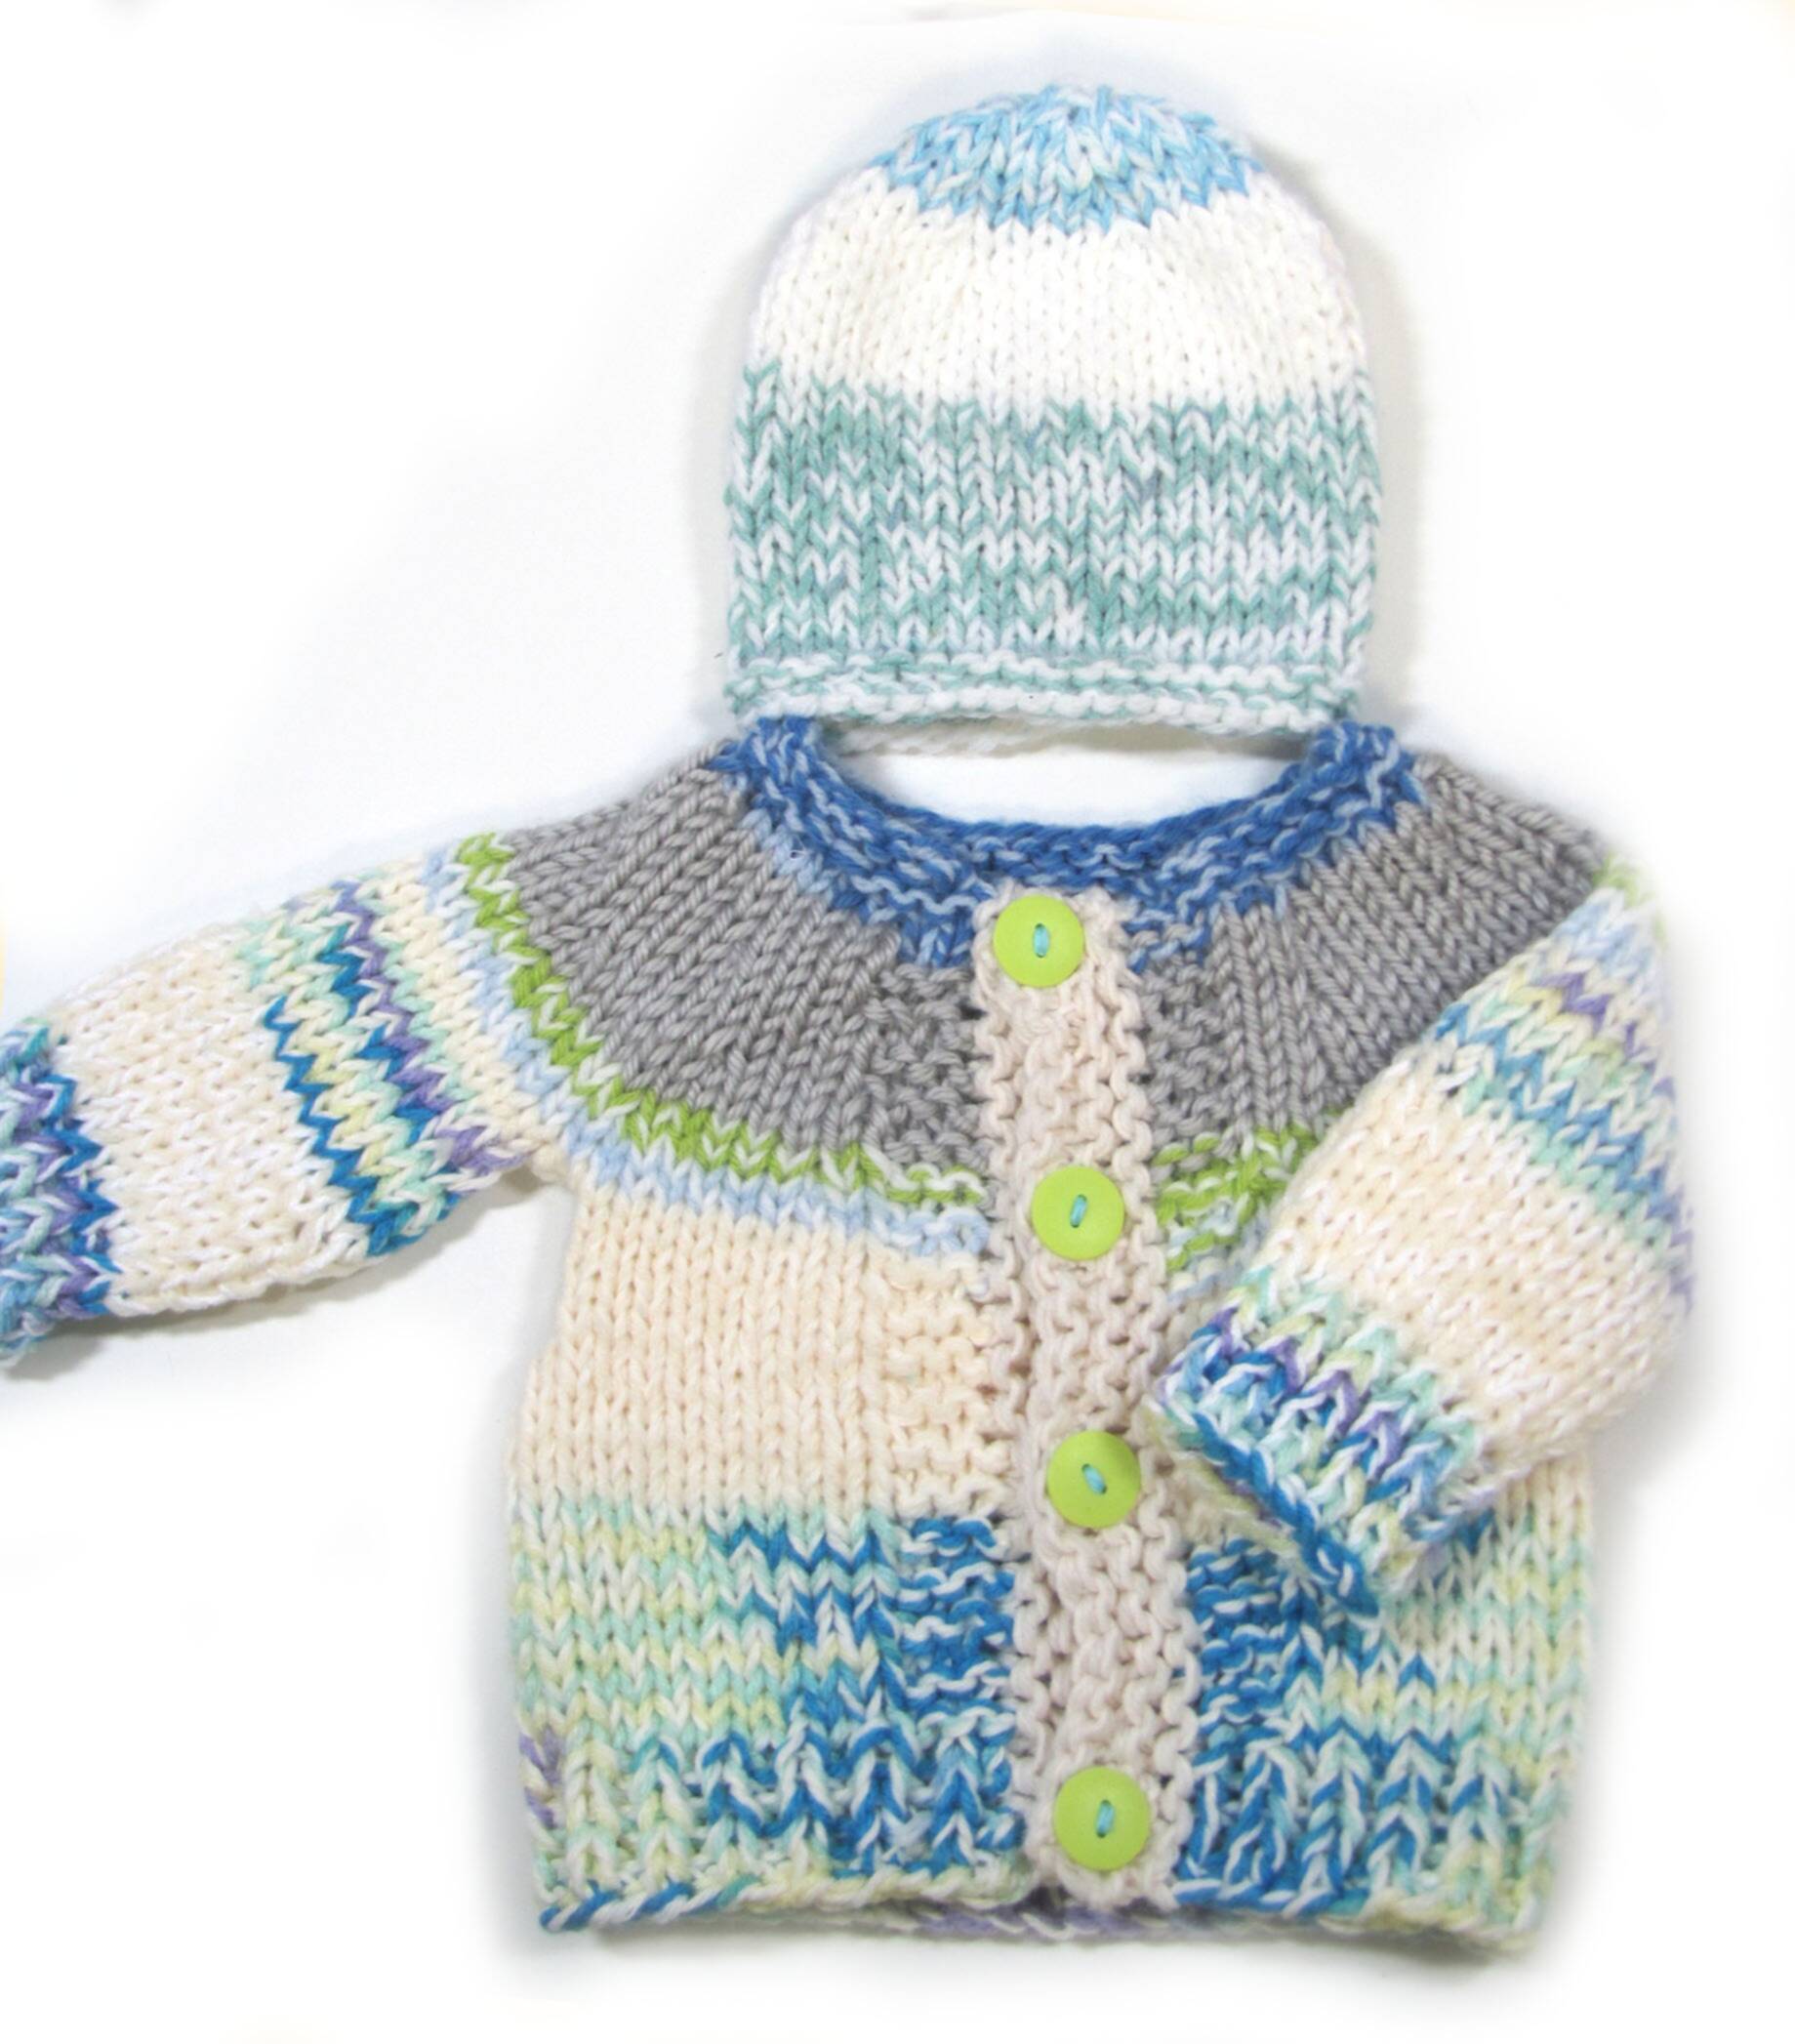 KSS Blocked Blue Sweater/Jacket and Hat (12 Months) SW-975 KSS-SW-975-AZH